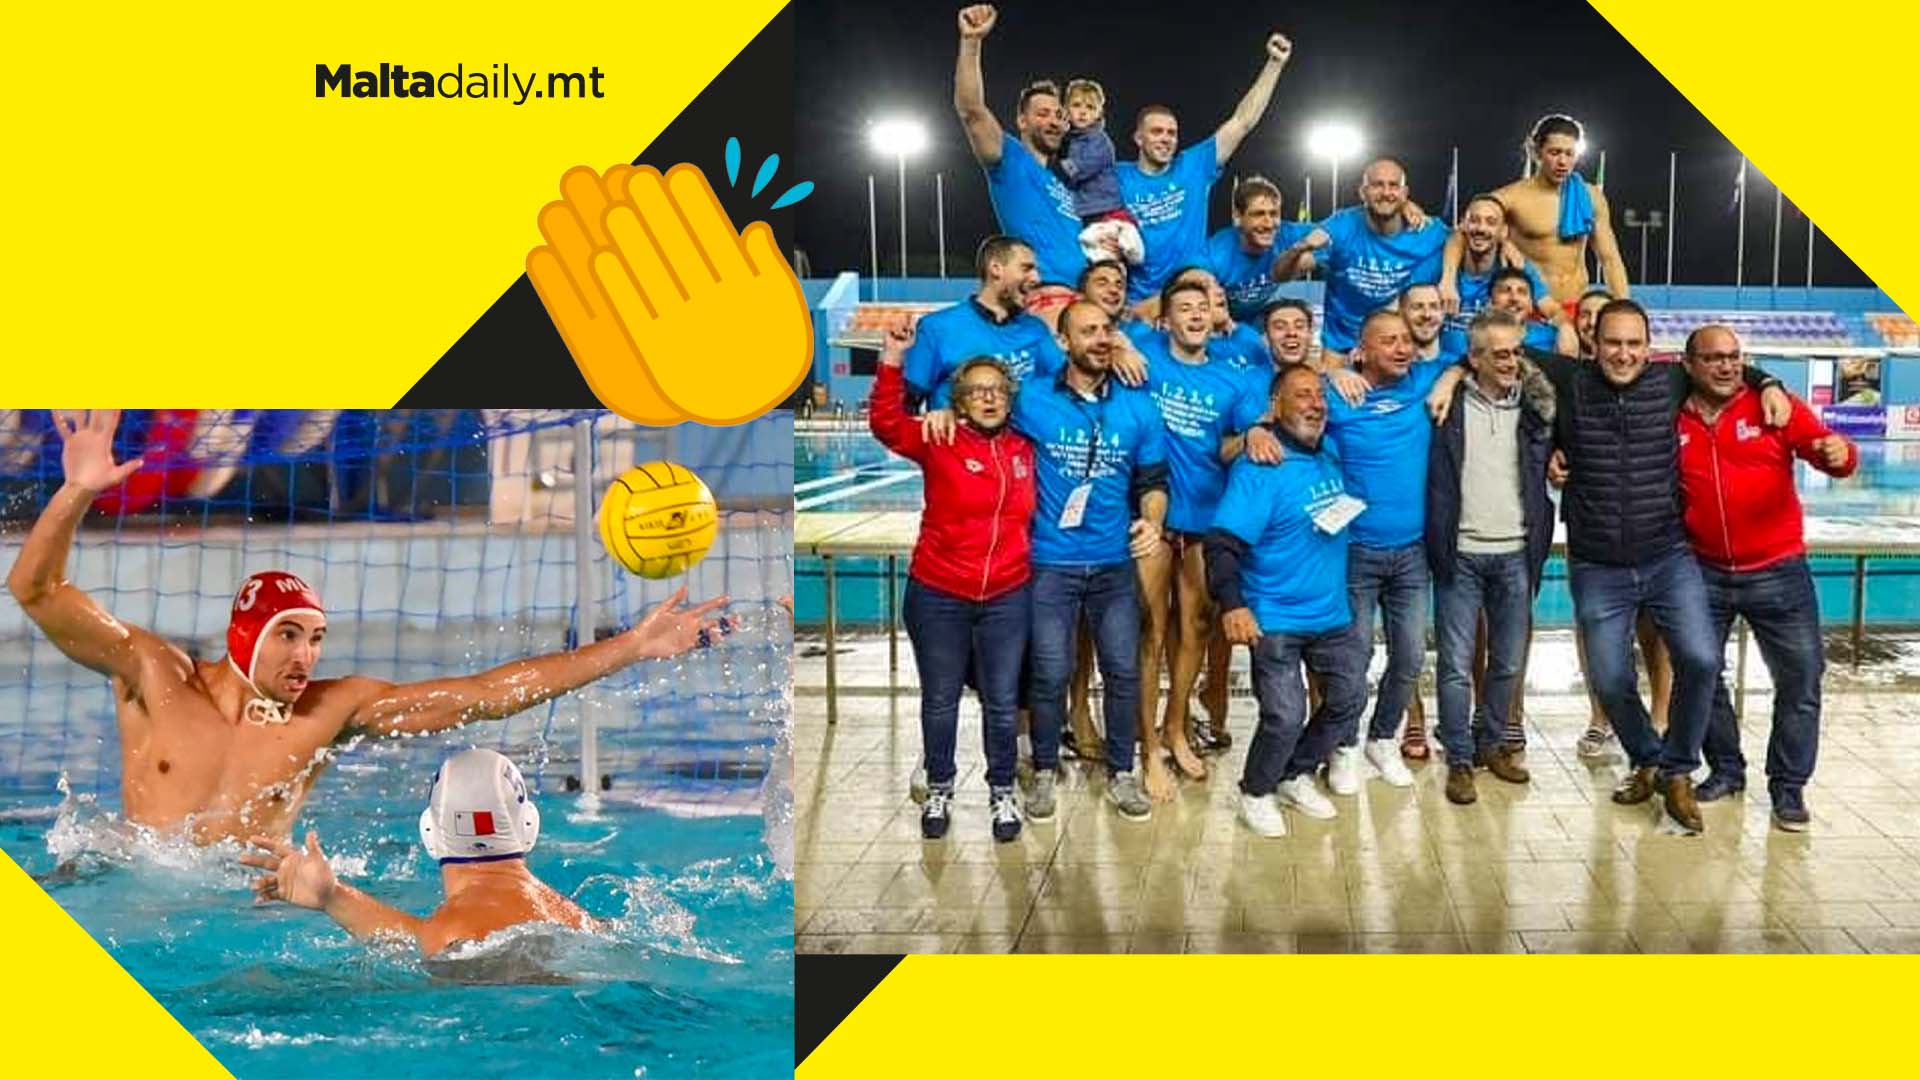 Malta’s waterpolo team in European finals again after beating Lithuania